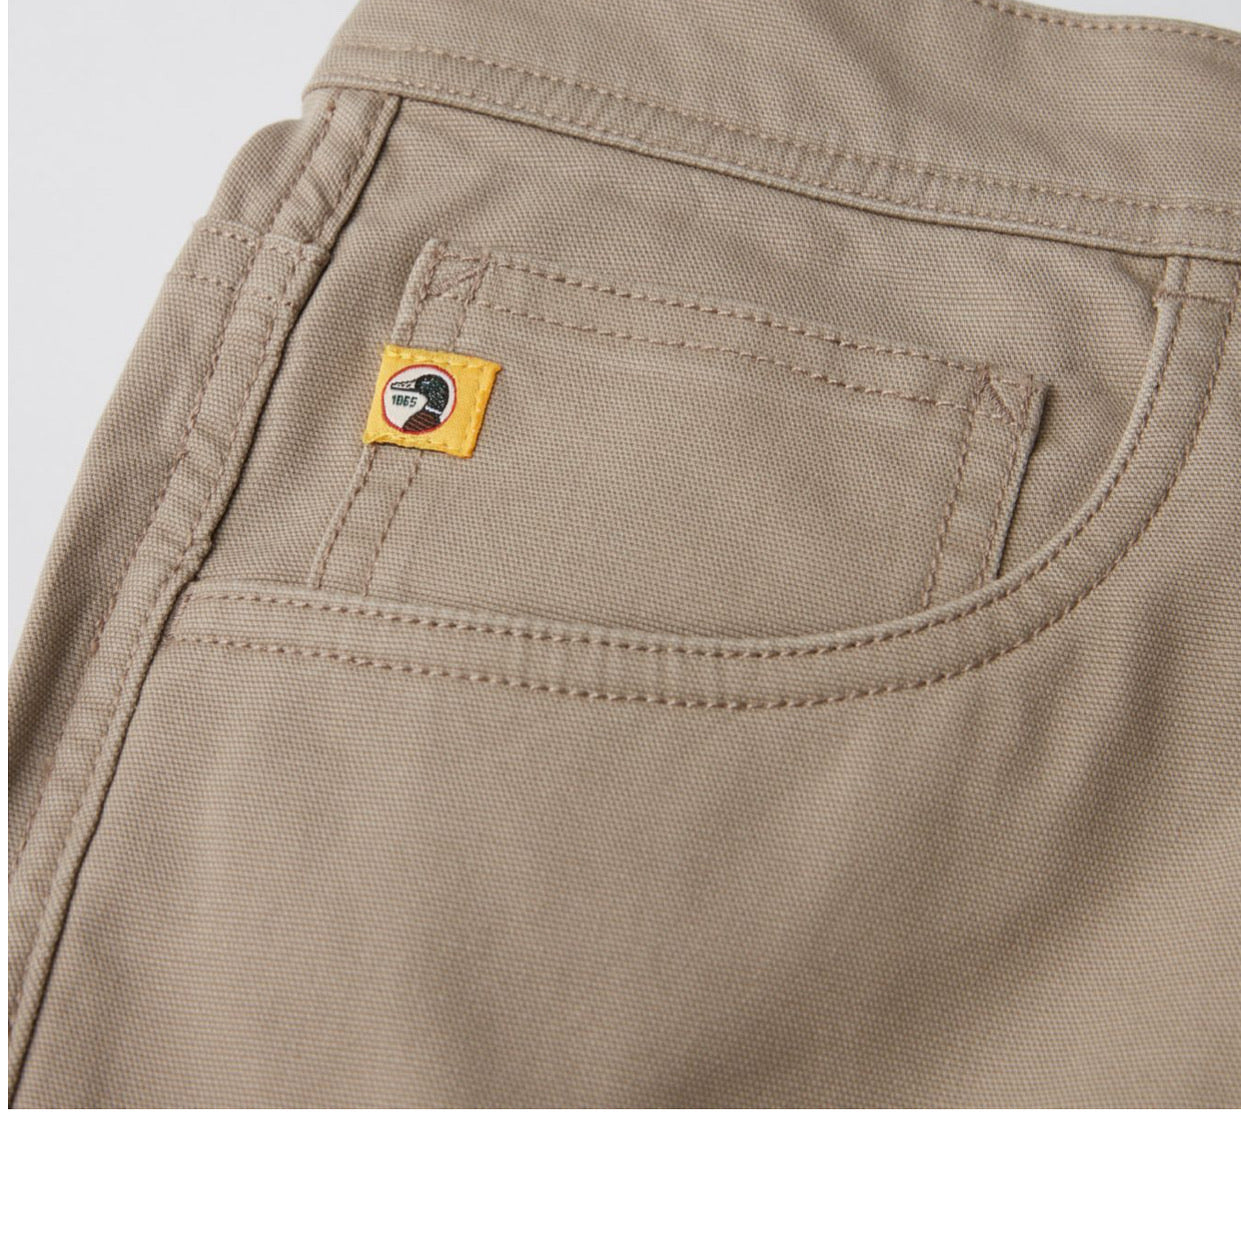 Duck Head 5 Pocket Awesome Pants